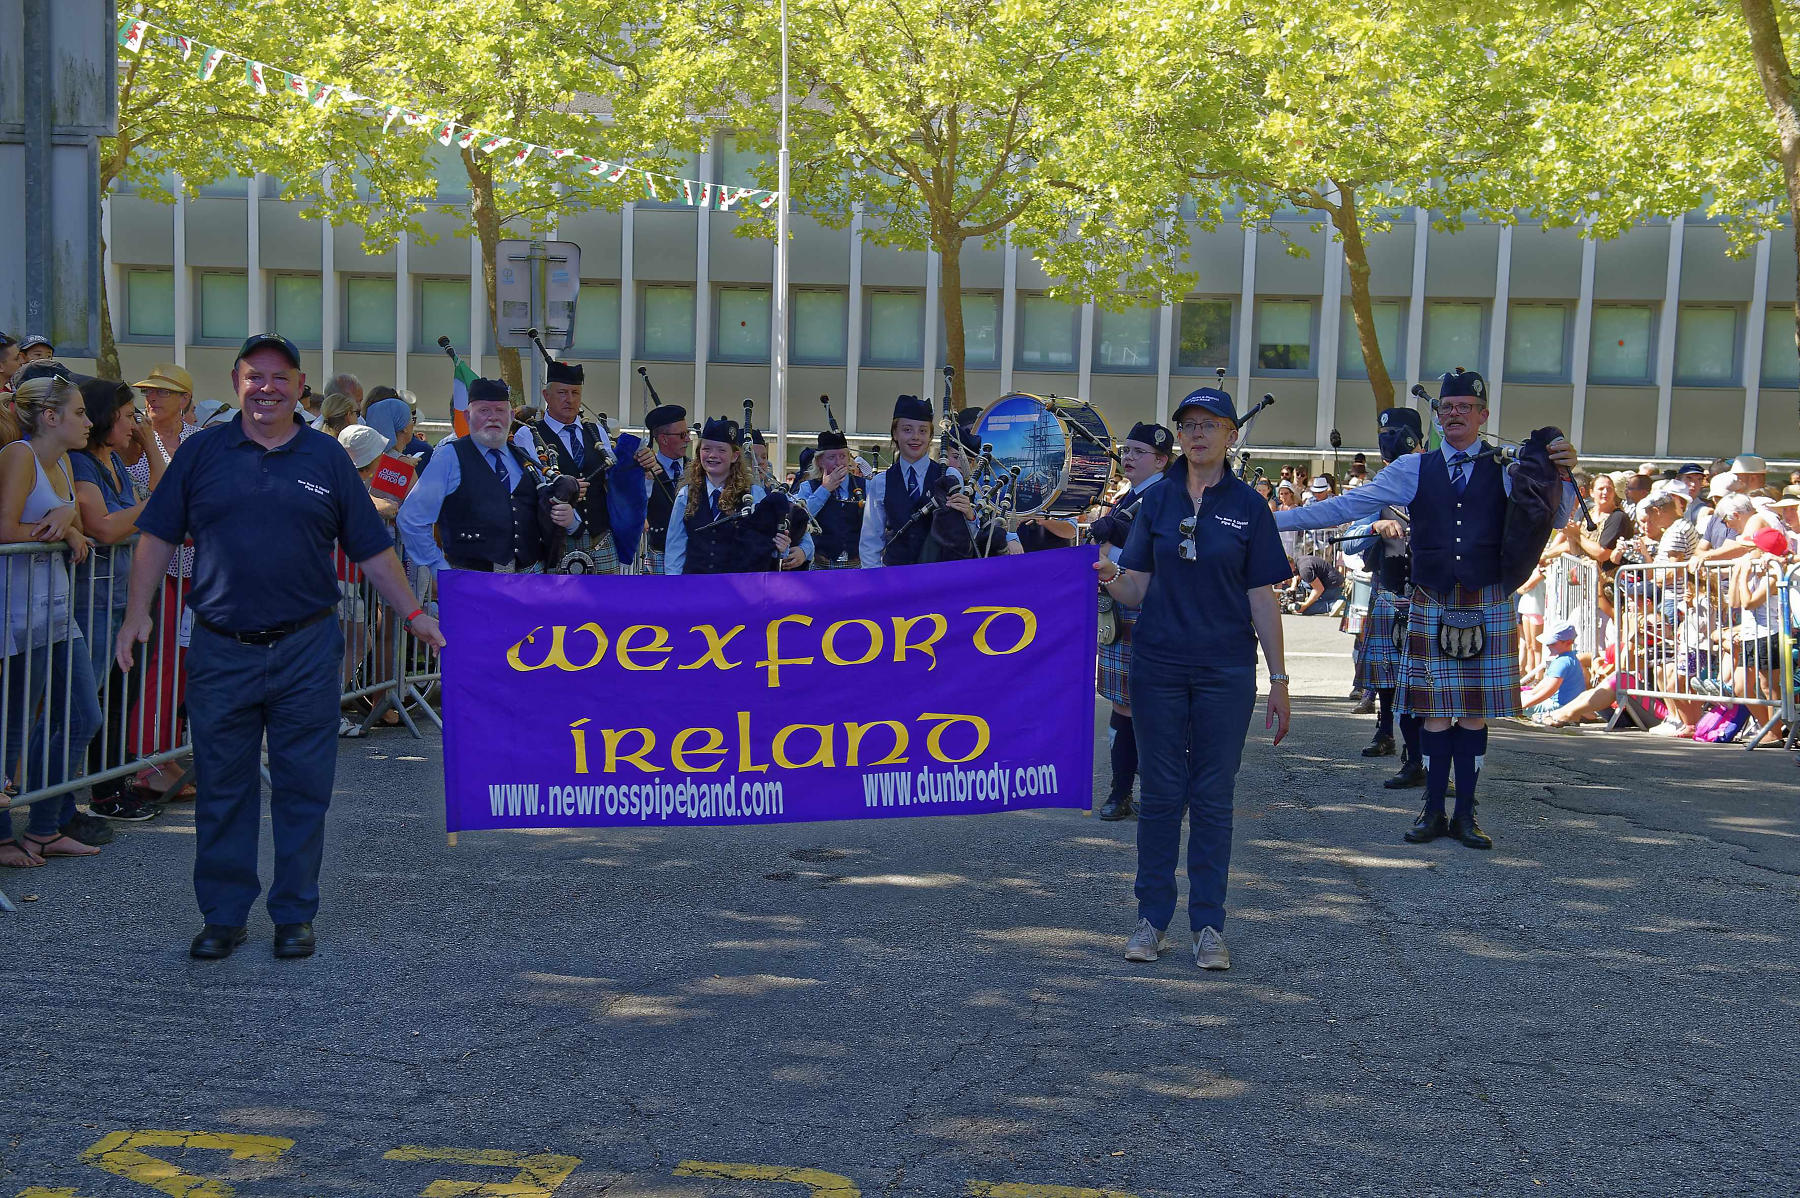 interceltique-2018-image13181-new-ross-and-district-pipe-band-d-irlande